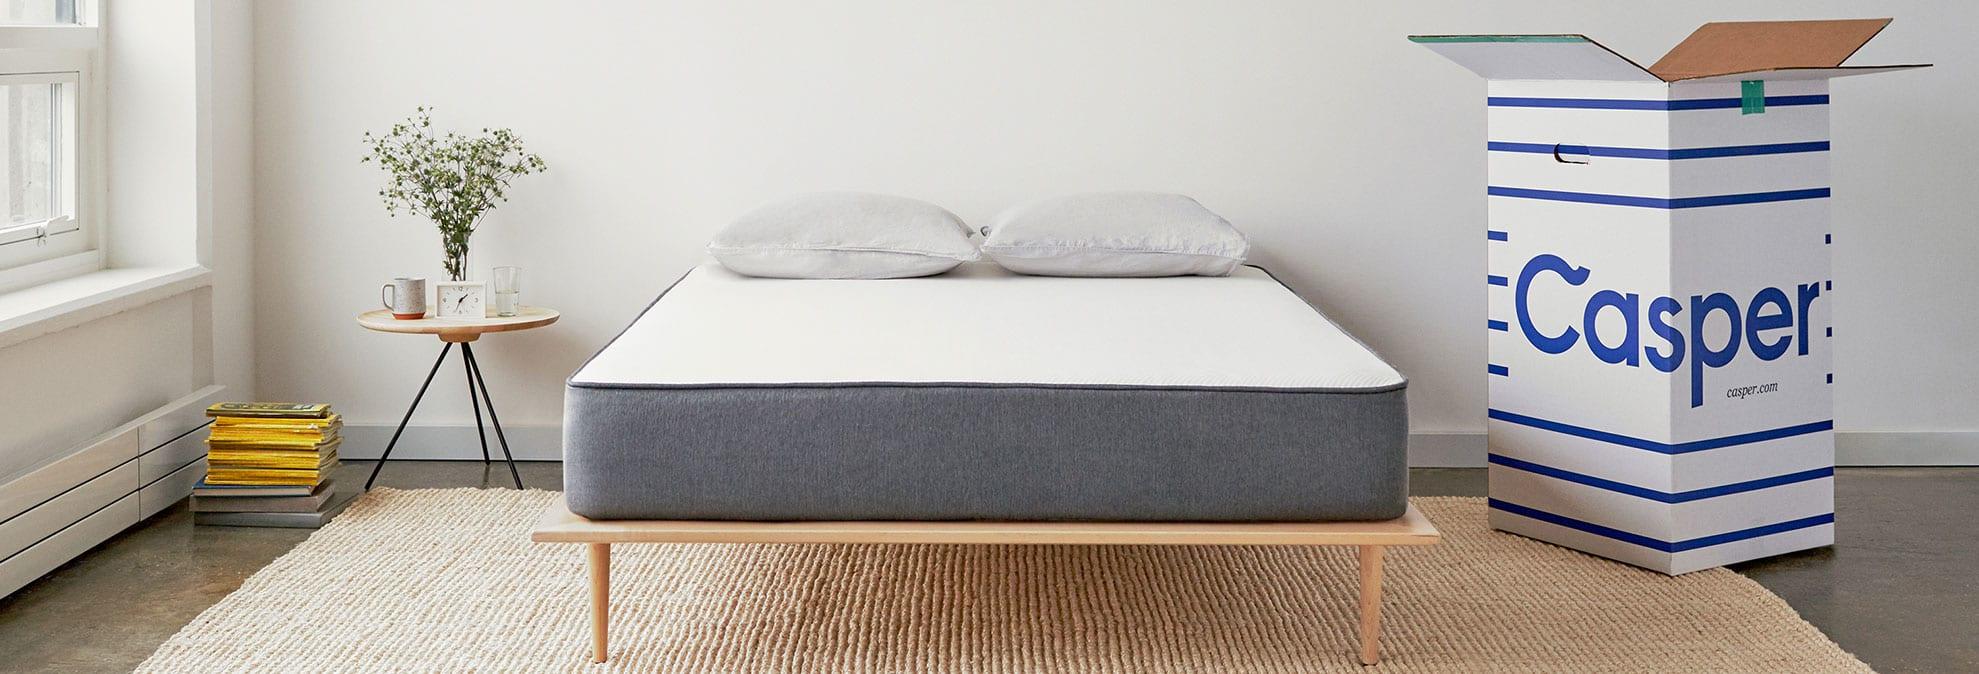 You Can Now Find Casper Mattresses at Target